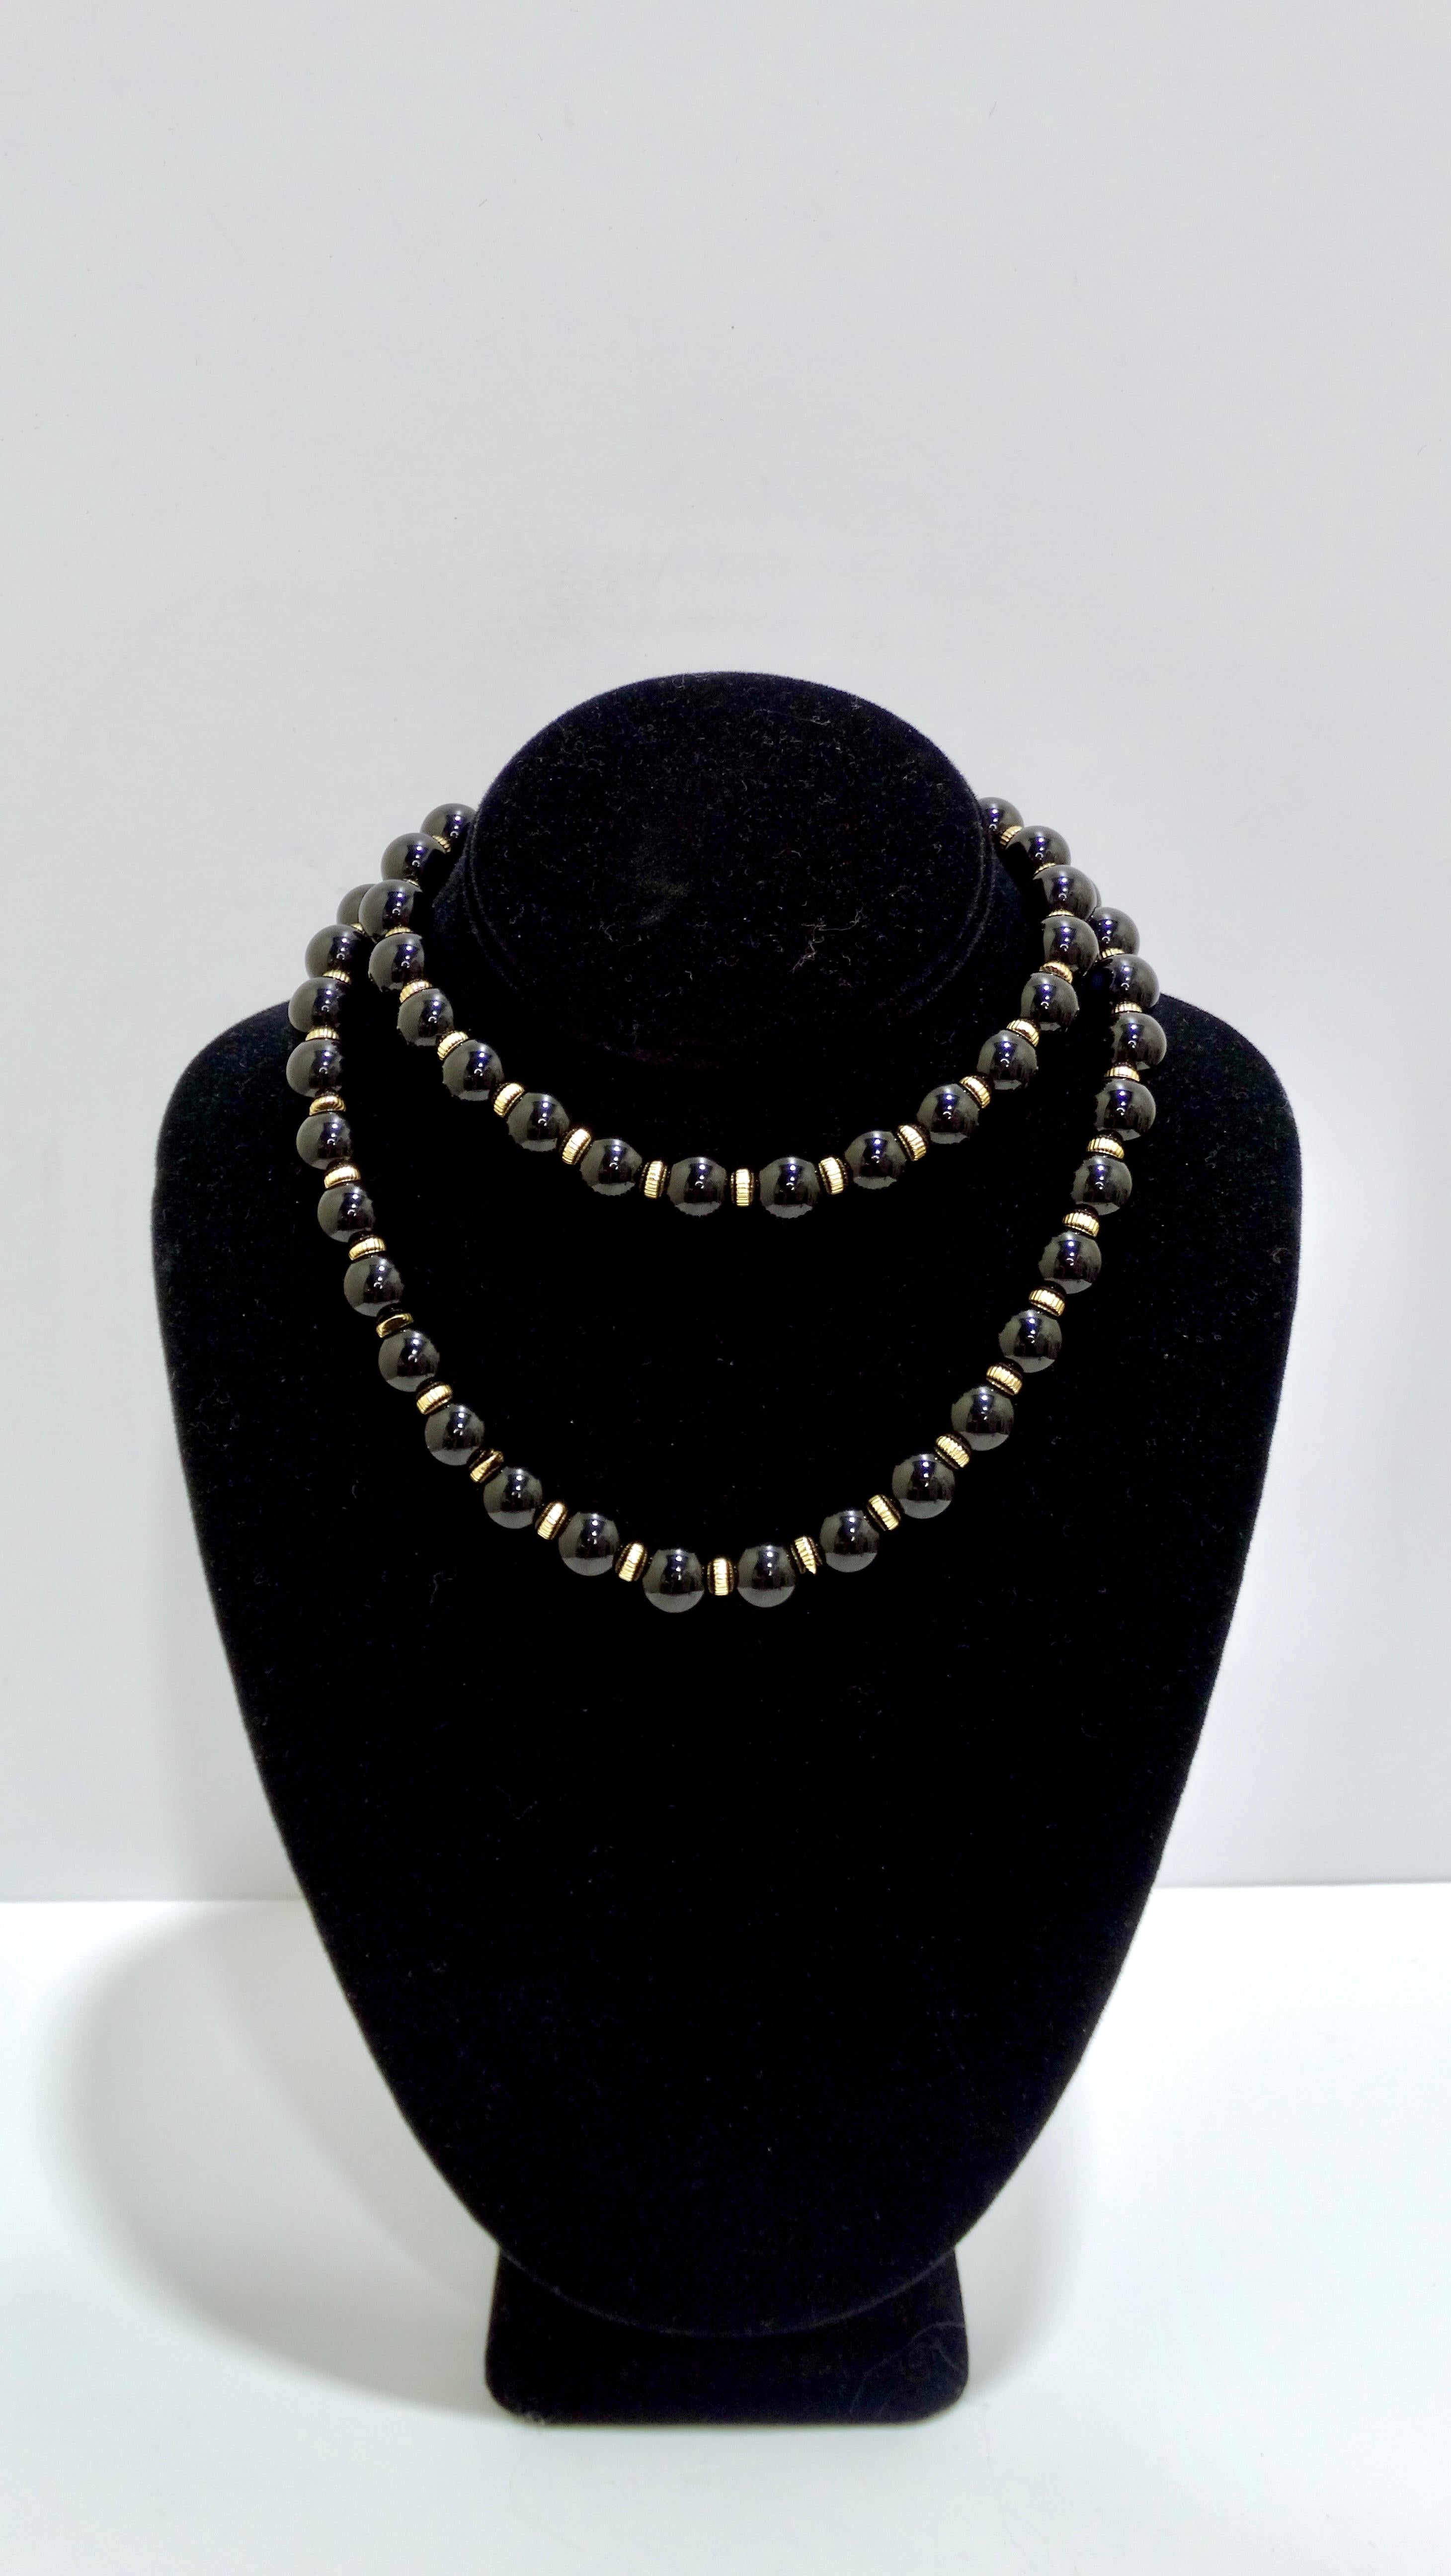 This crafted necklace is made of a mix of black Onyx and 14k gold that contrasts beautifully. A beaded necklace has many possibilities for styling as it can be styled as a single-layer or double-layer. Wear with a vintage Prada maxi dress and some